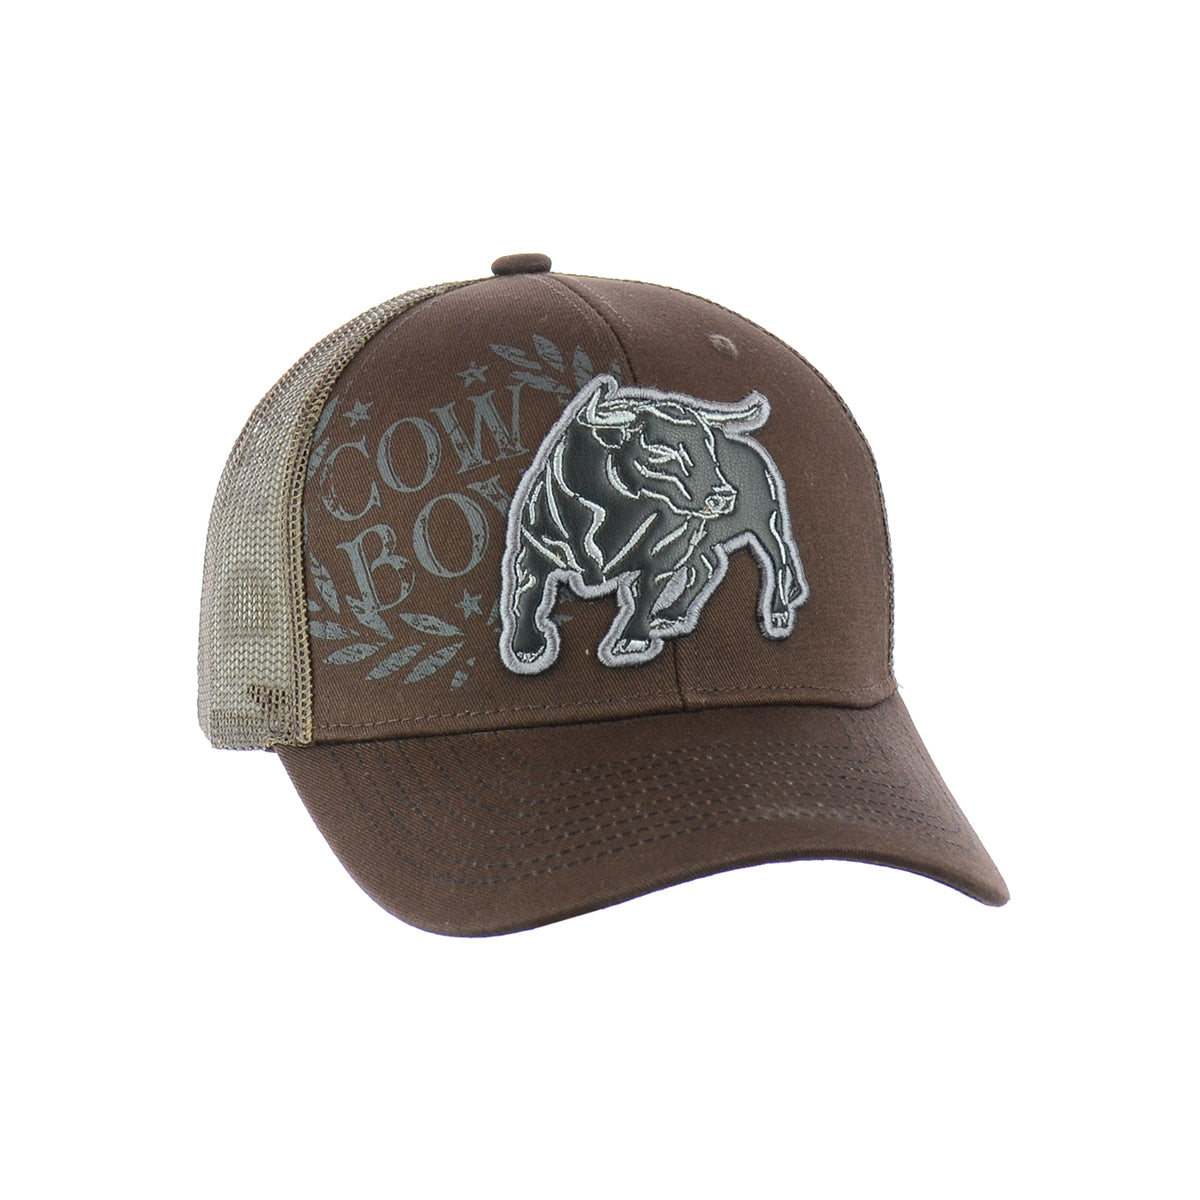 Bull Hat Embroidered Snapback